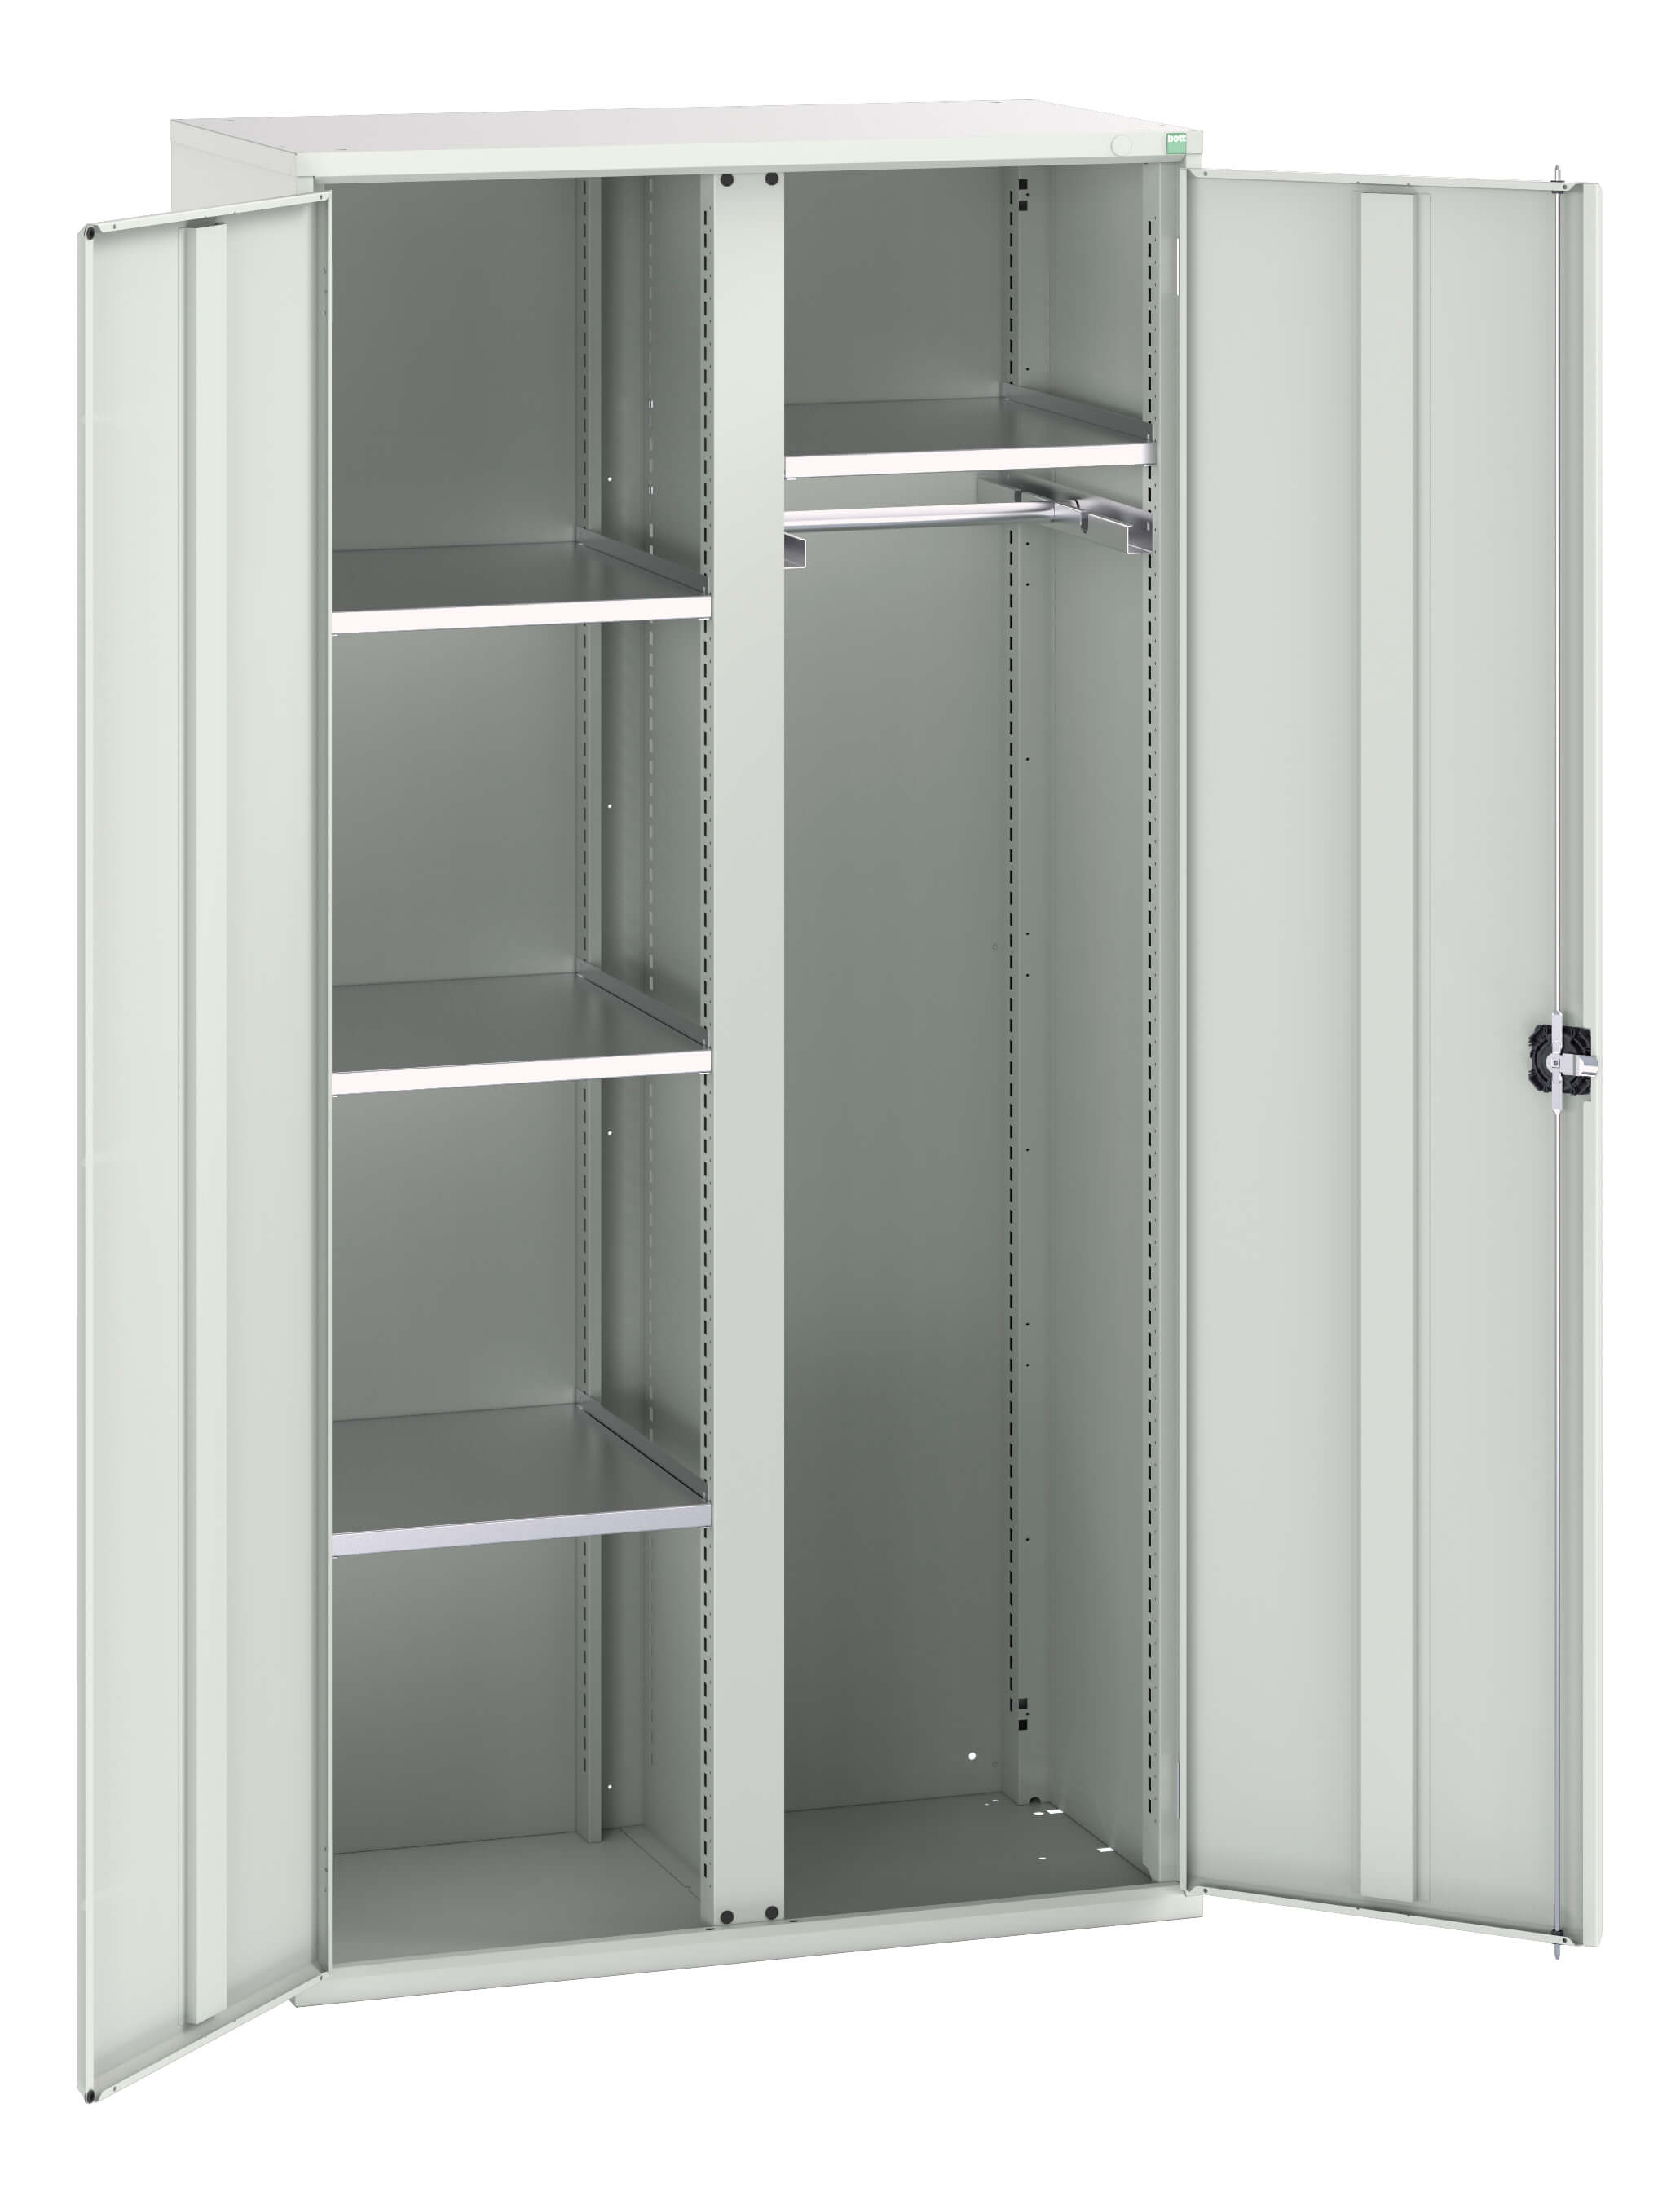 Bott Verso Ppe / Janitorial Kitted Cupboard With Vertical Partition - 16926579.16